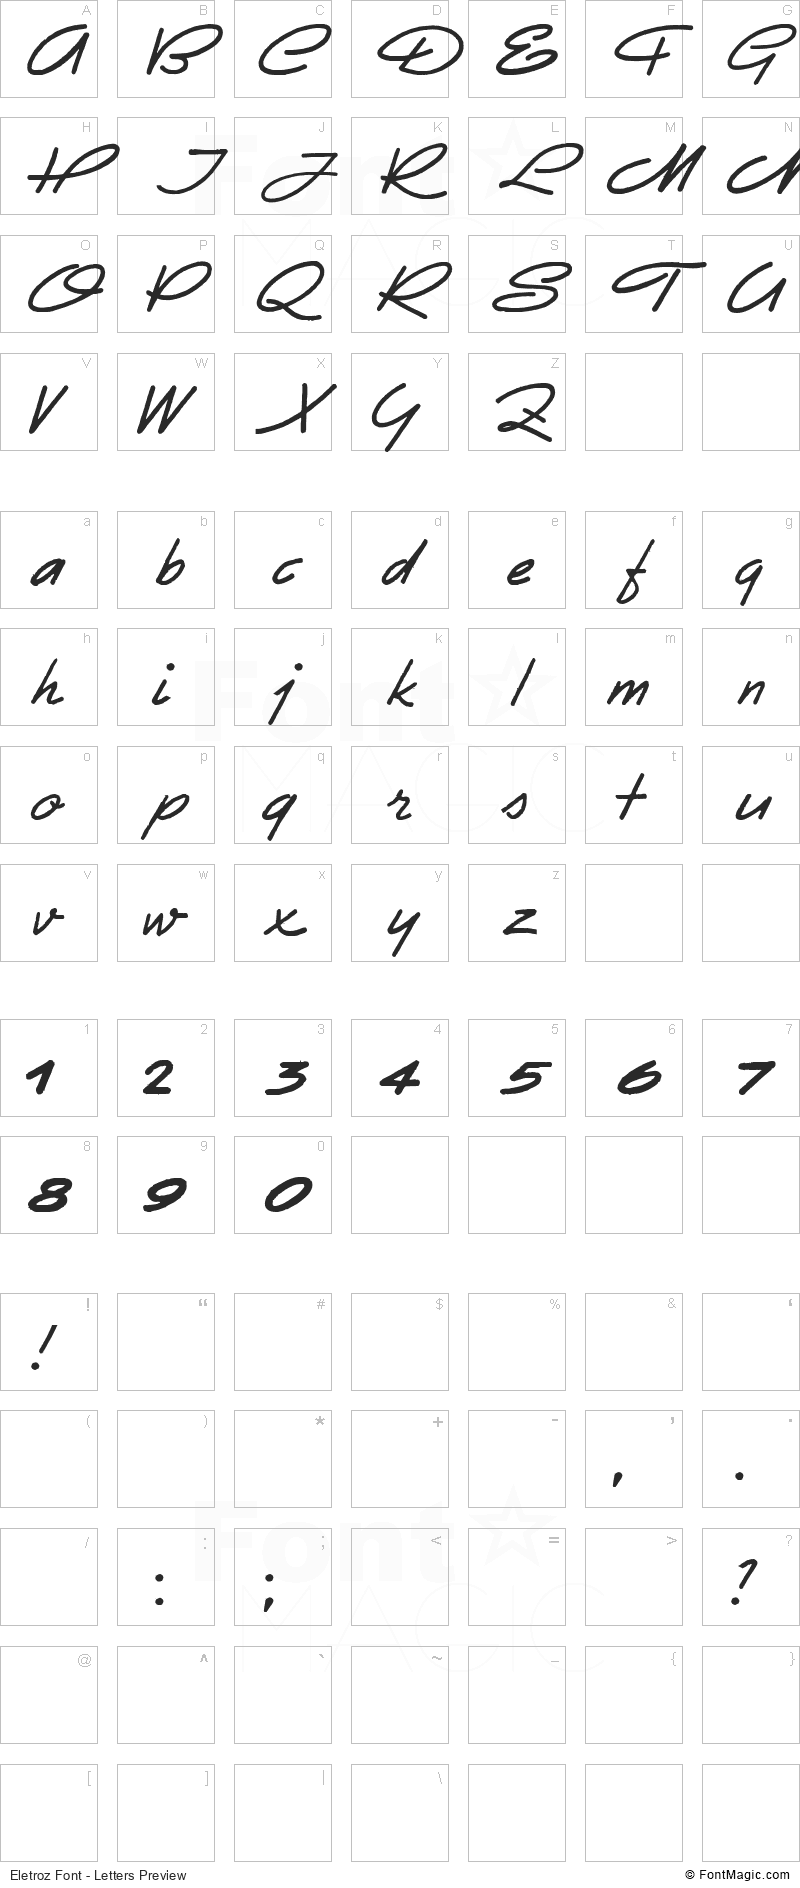 Eletroz Font - All Latters Preview Chart